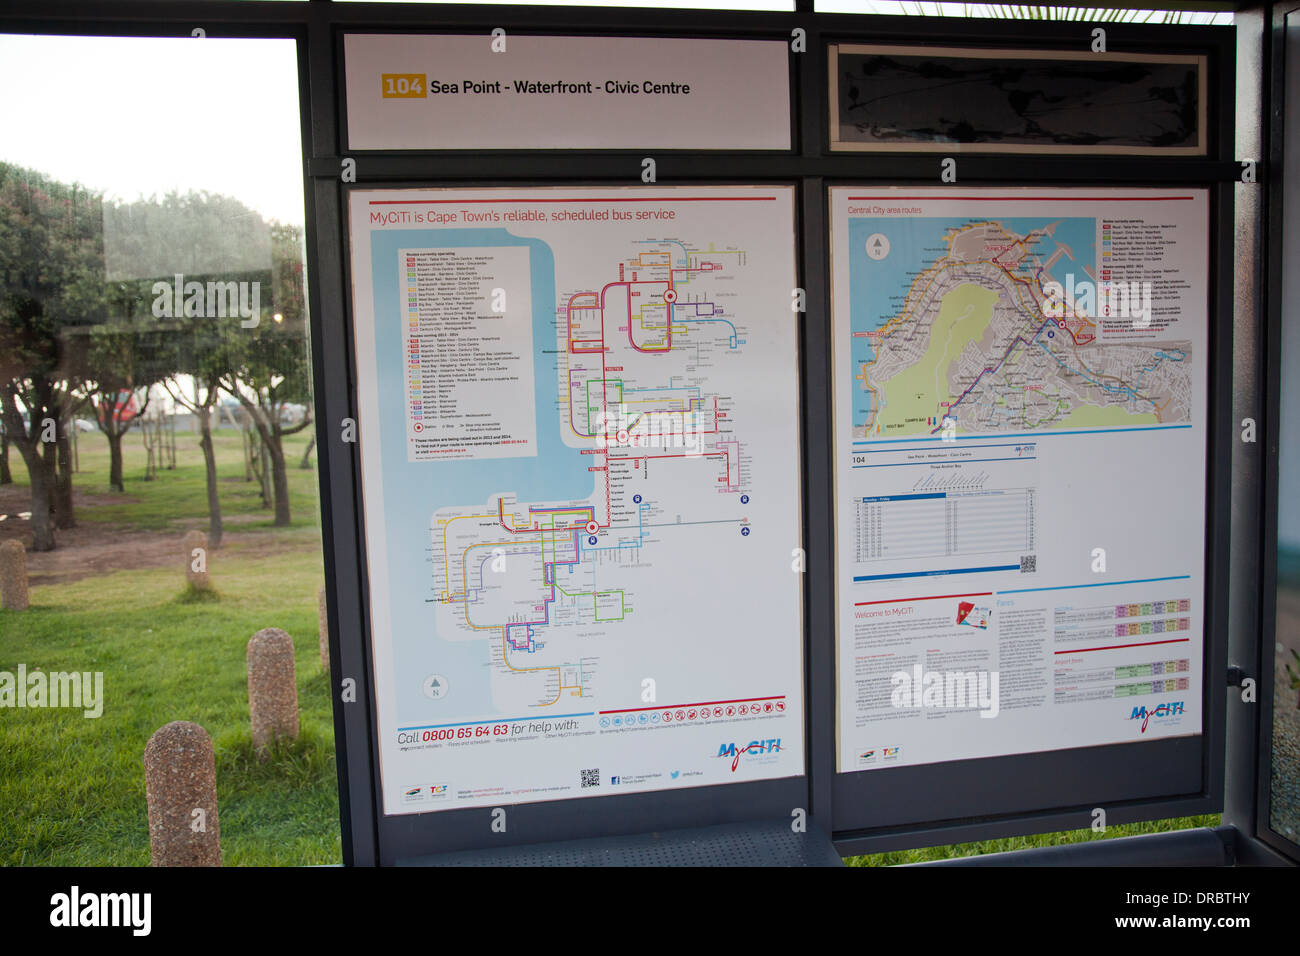 MyCiti is Cape Town's new Bus Service - Bus stop in Mouille Point, Cape Town - South Africa Stock Photo